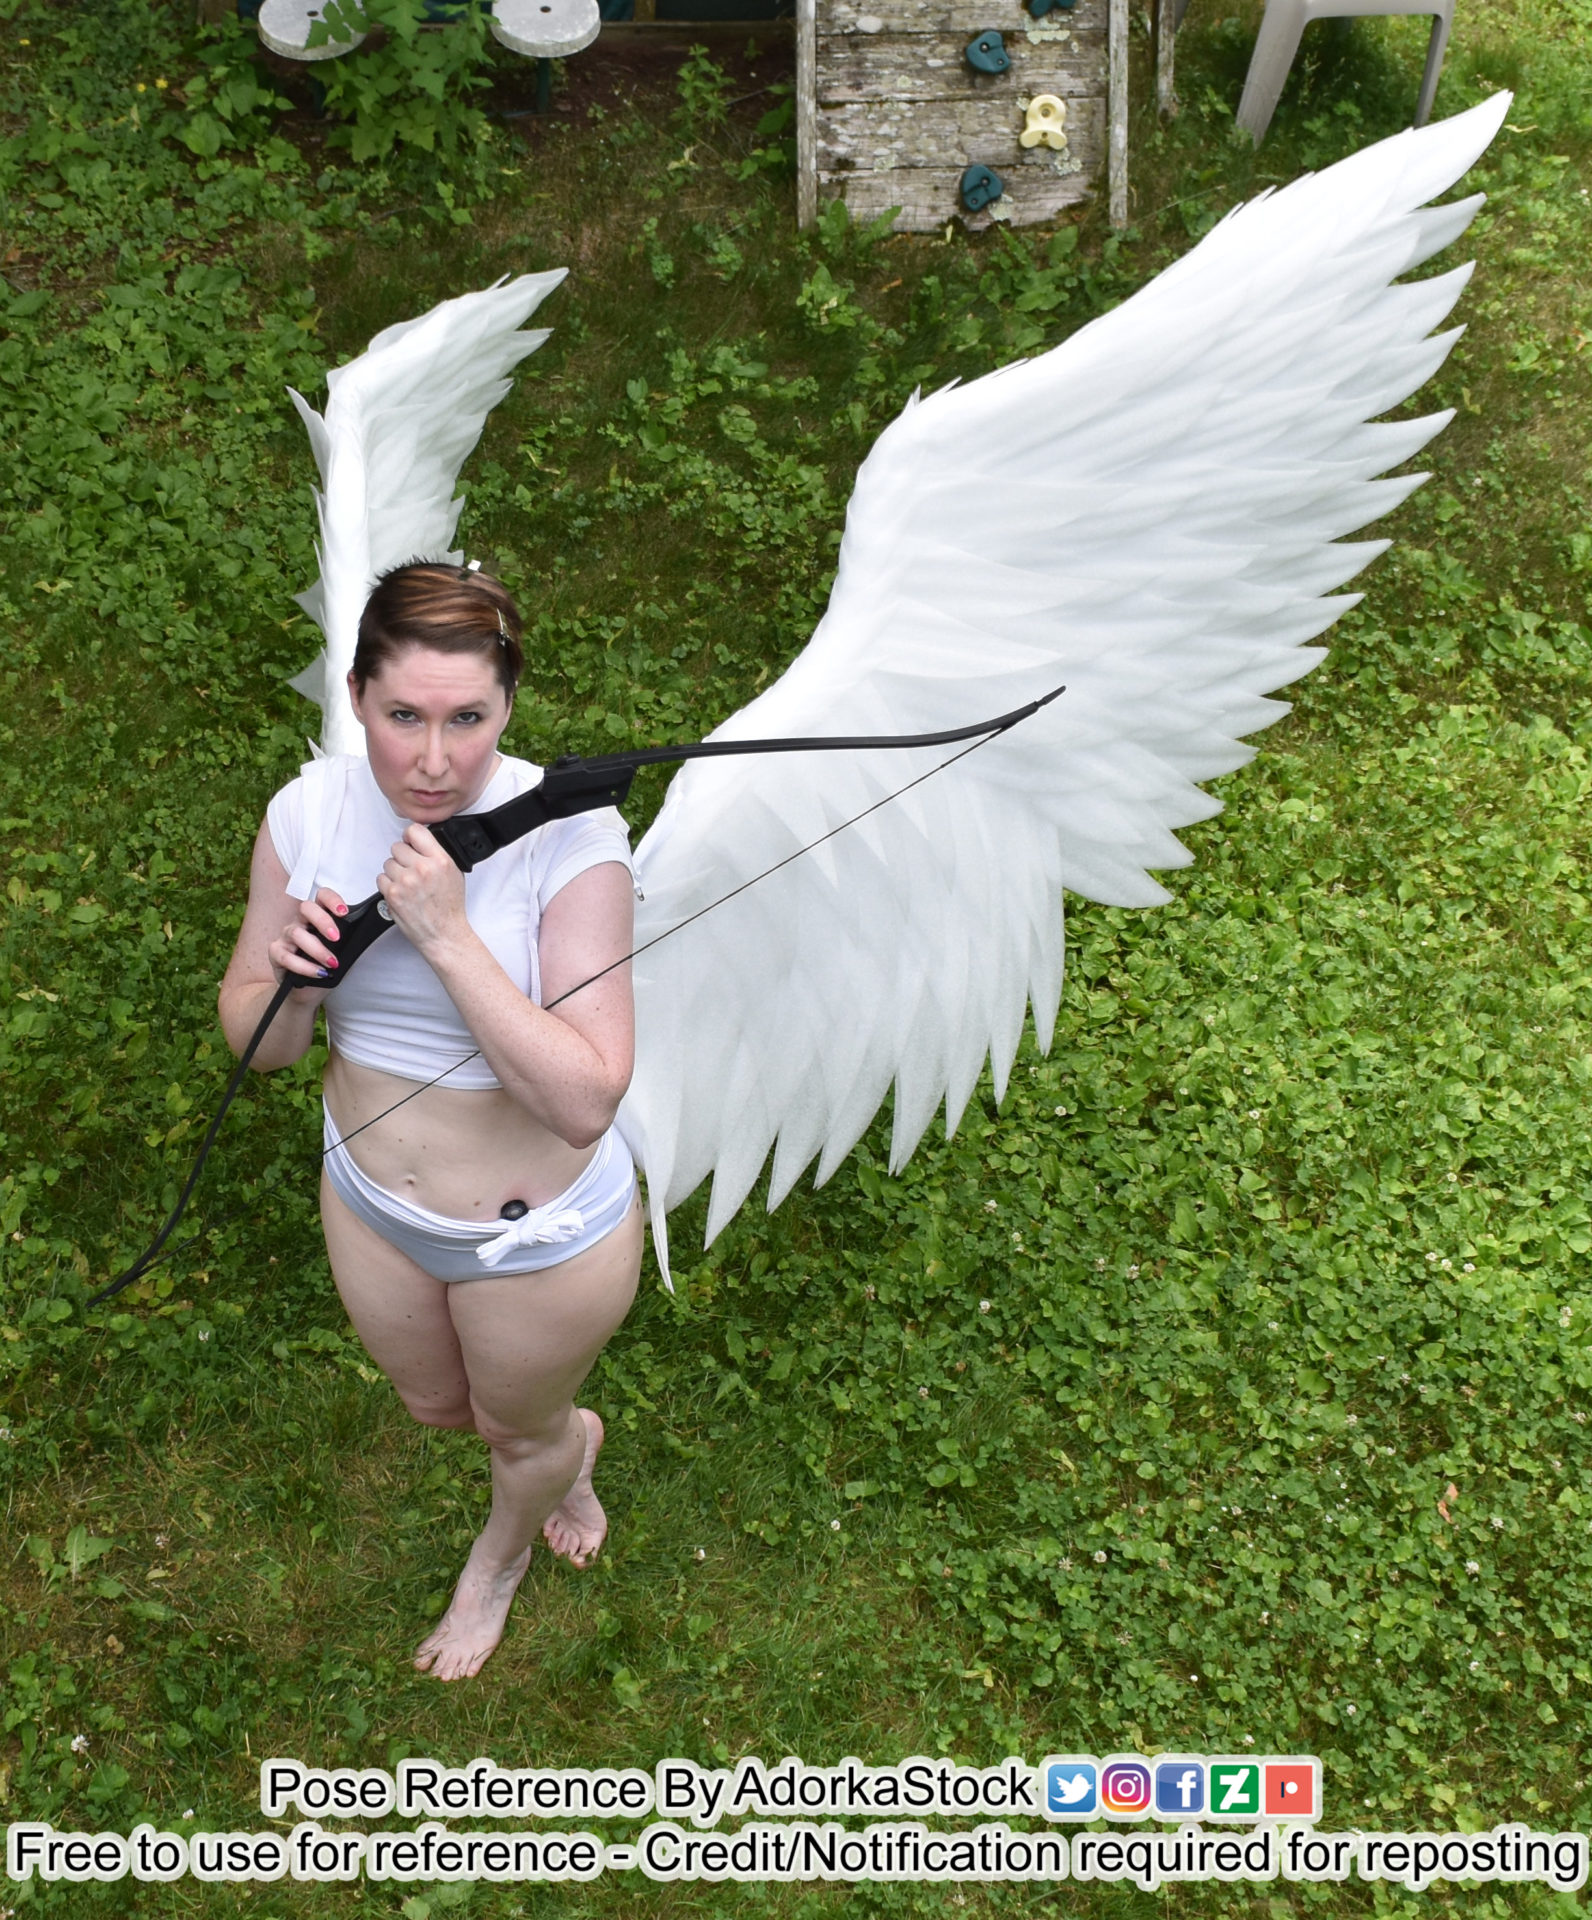 A picture taken from a high angle of a woman in a white swim suit with a crop top, wearing large white angel wings and clutching a black bow weapon close to her chest and looking up